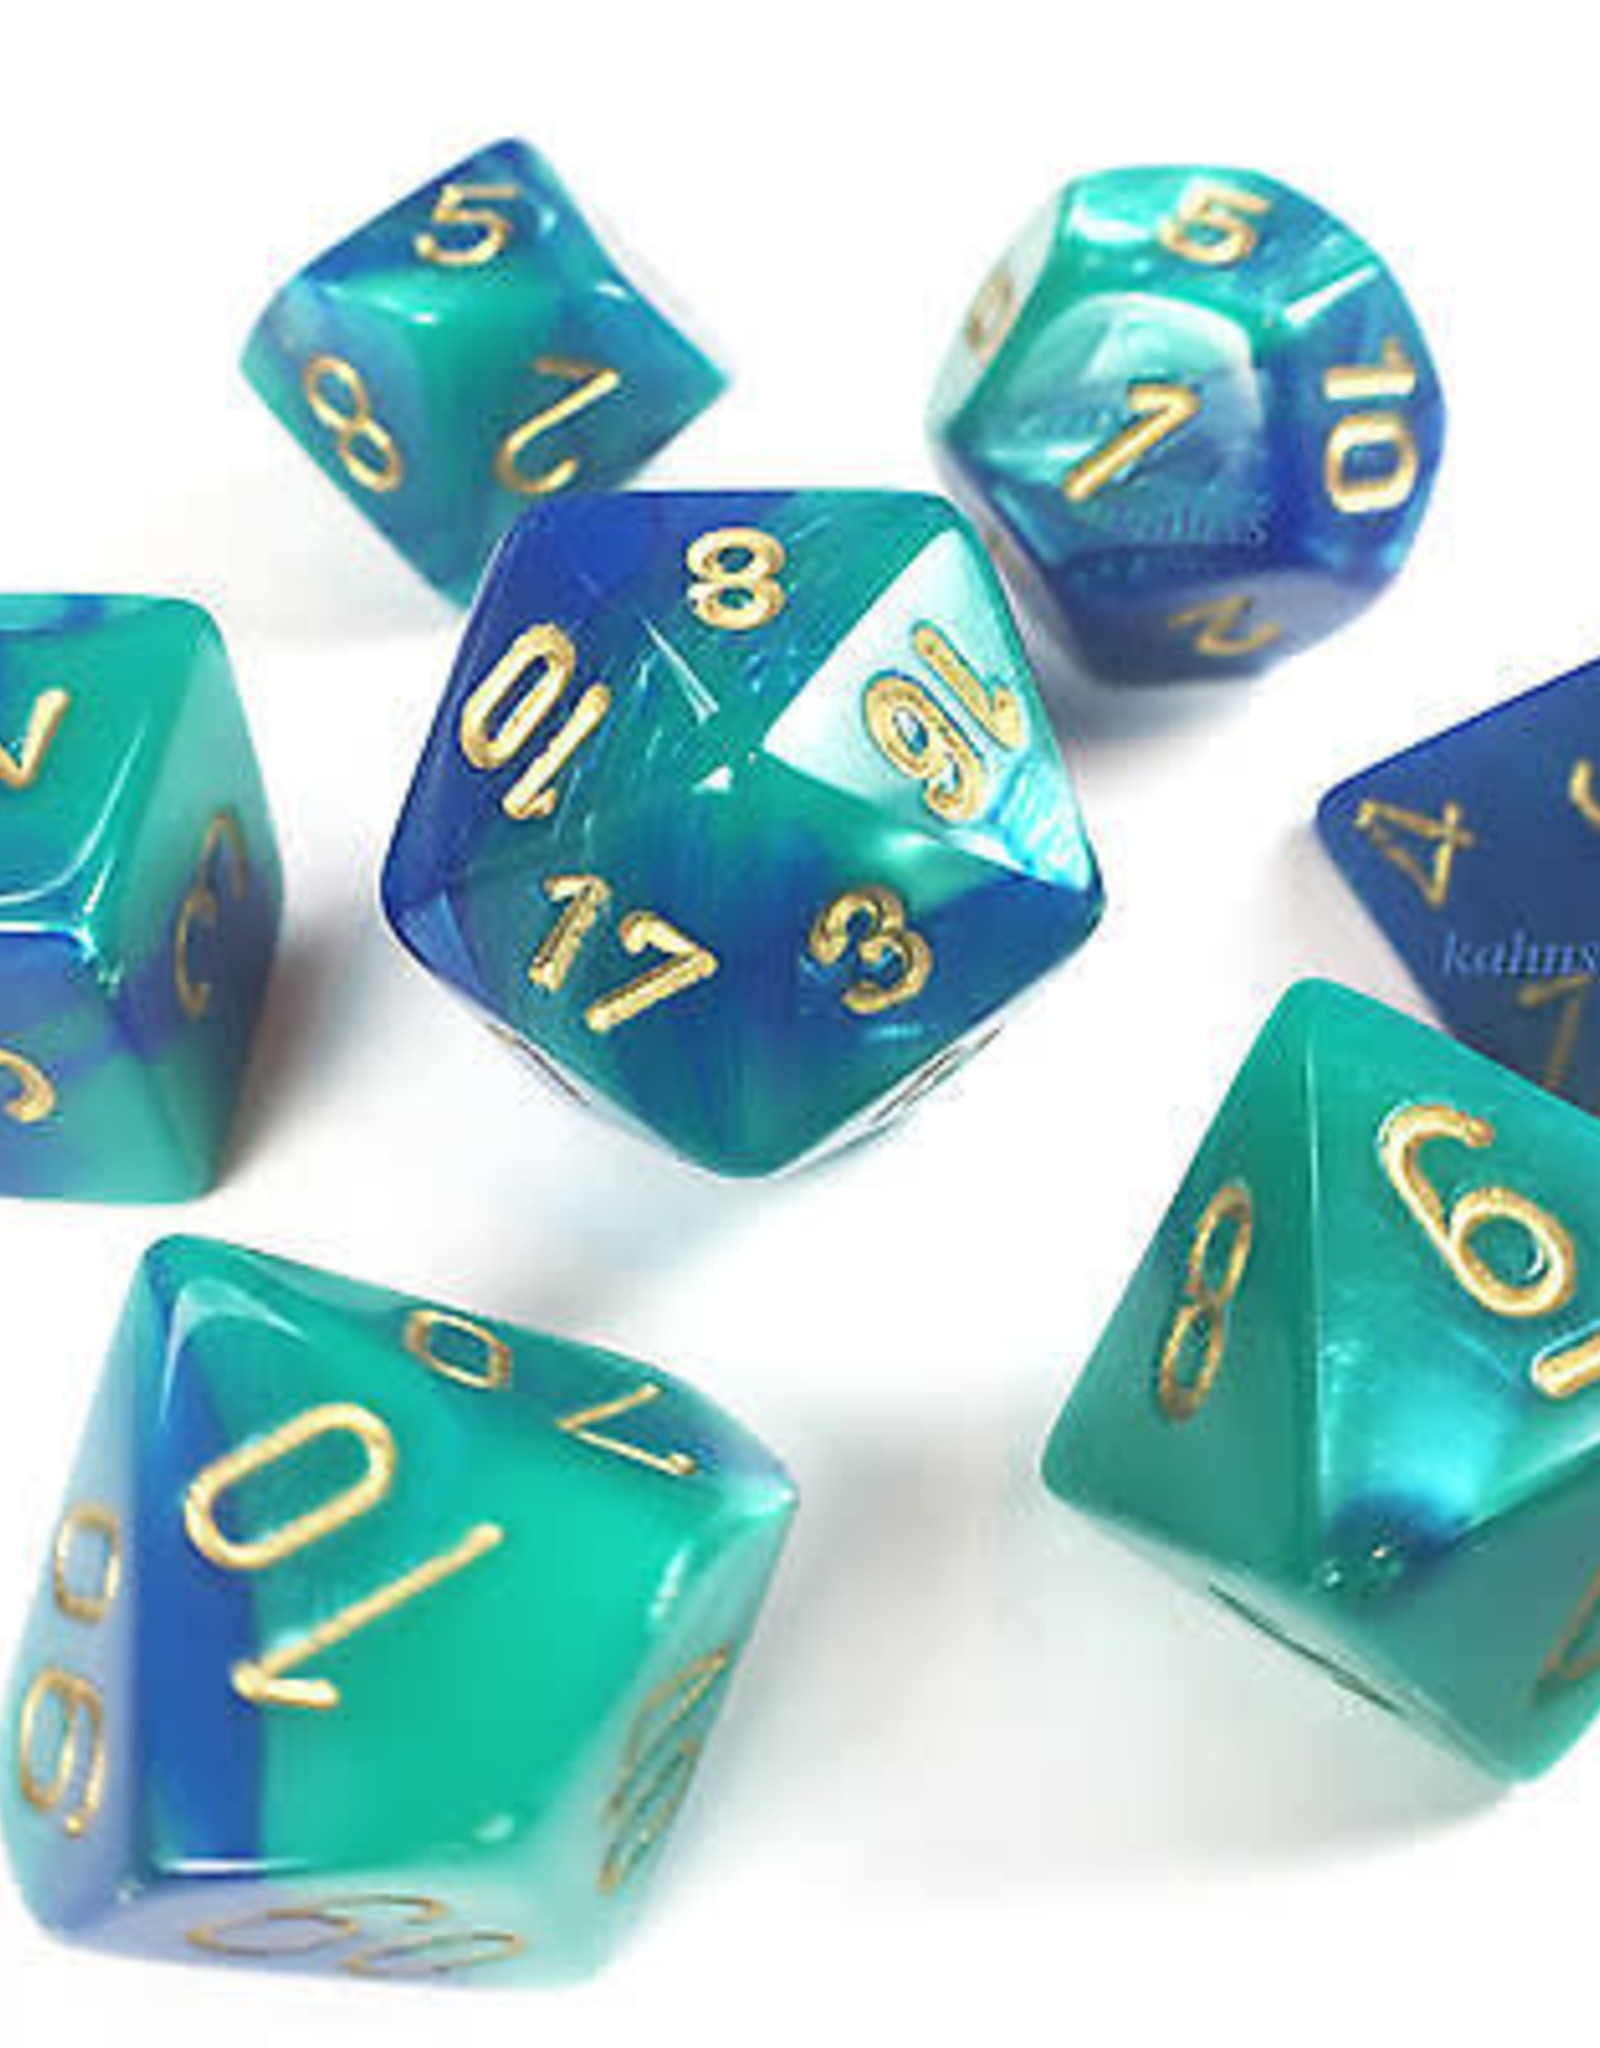 Chessex Dice - 7pc Gemini Blue-Teal/Gold Polyhedral